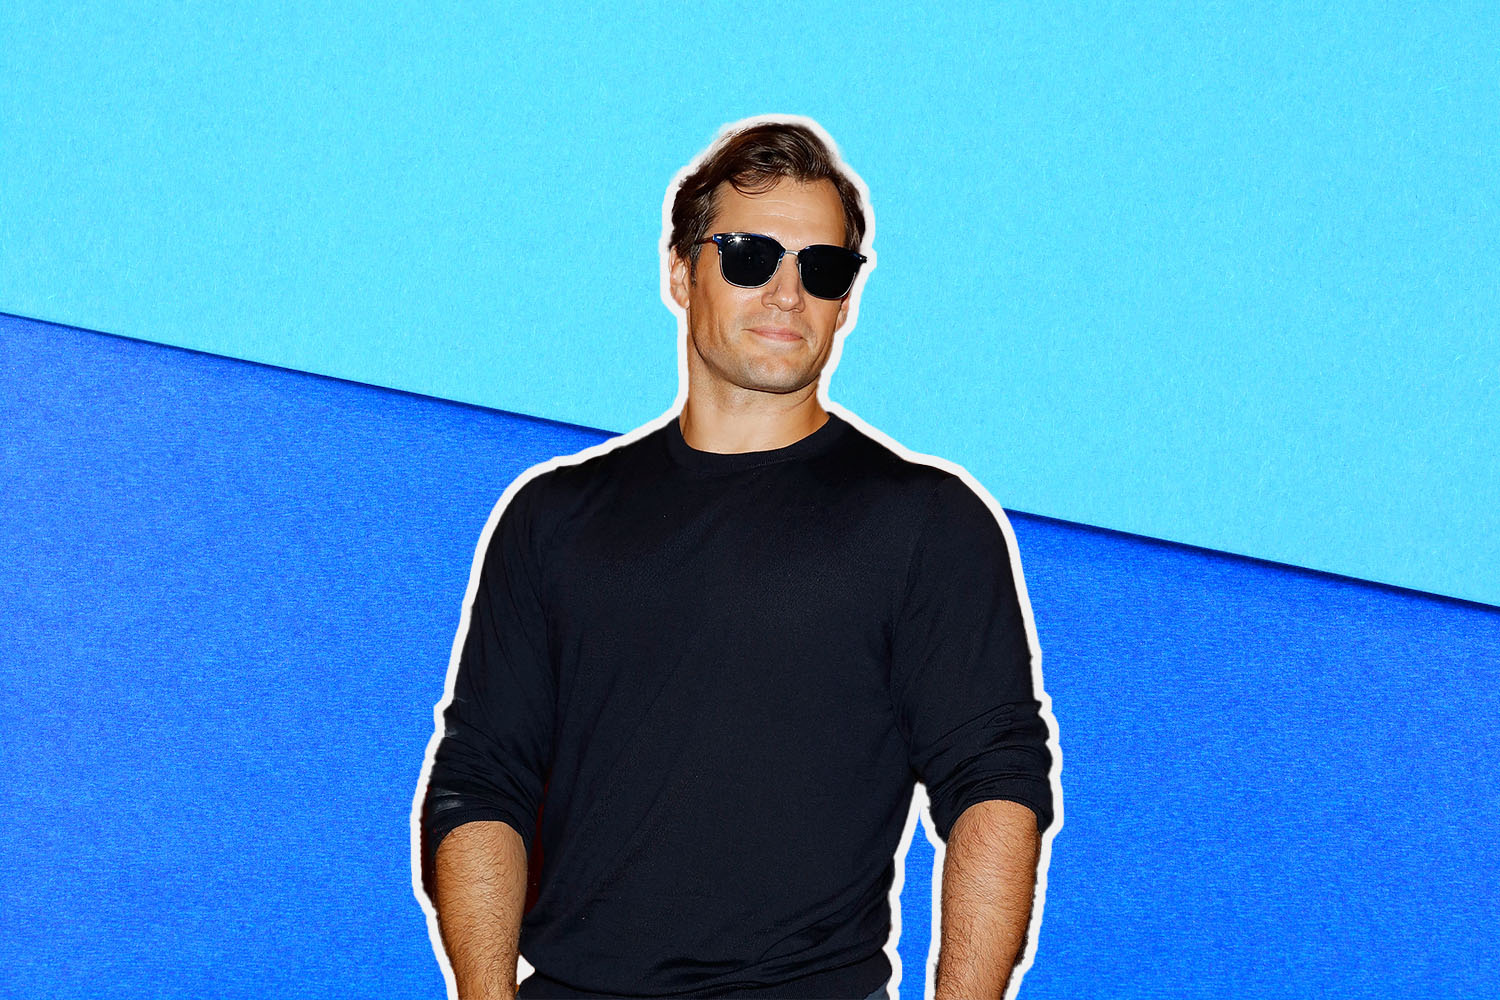 A photo of Henry Caville wearing sunglasses against a two-toned blue background